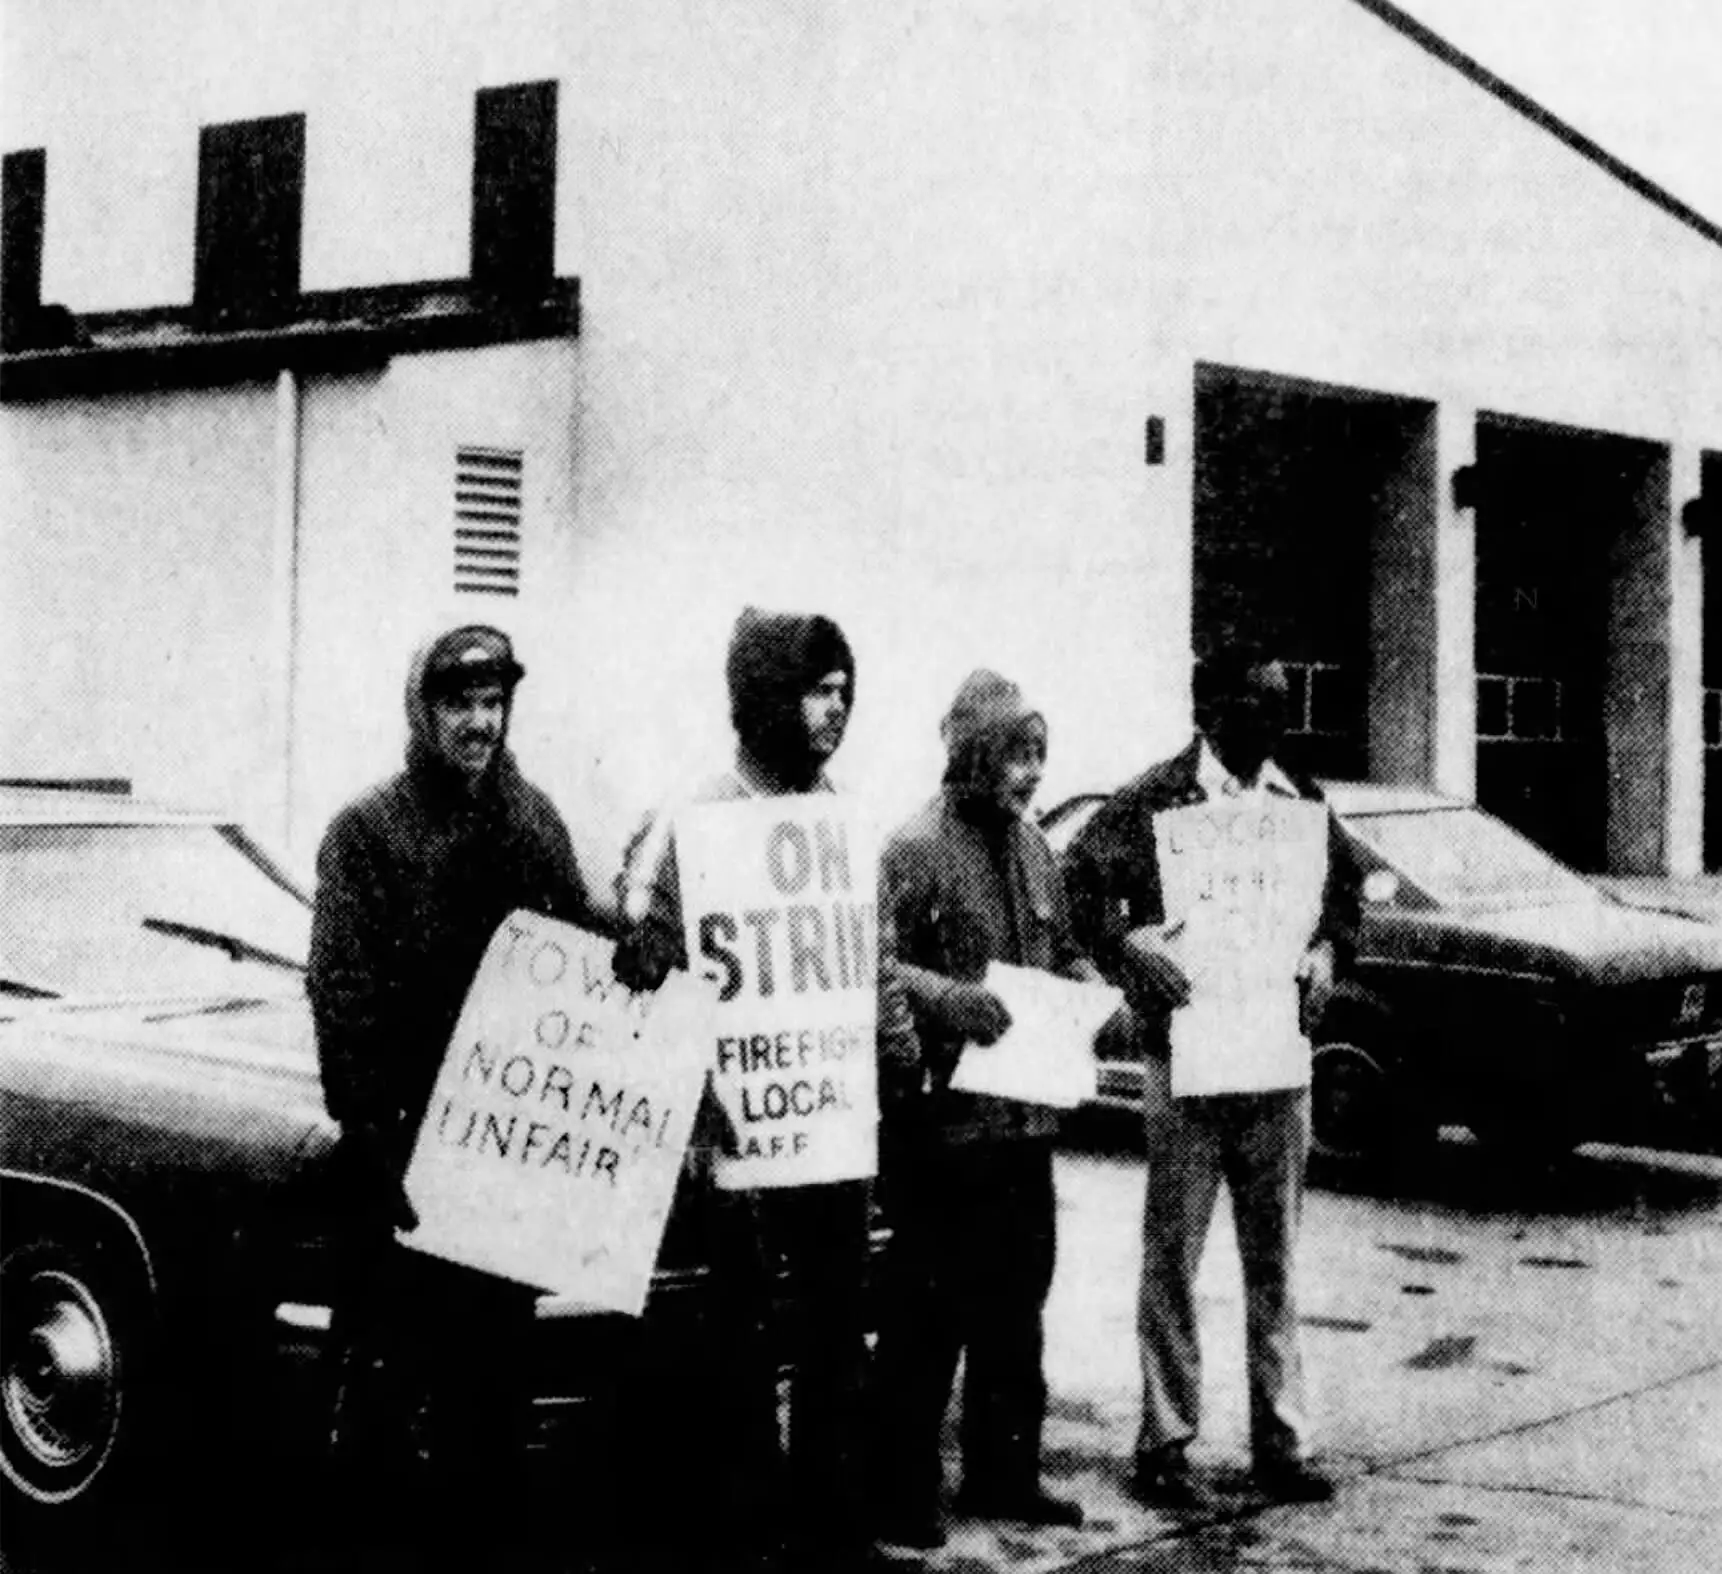 Black and white photo of four men in jackets standing in front of parked cars outside of a fire station while holding posterboard signs. Signs read